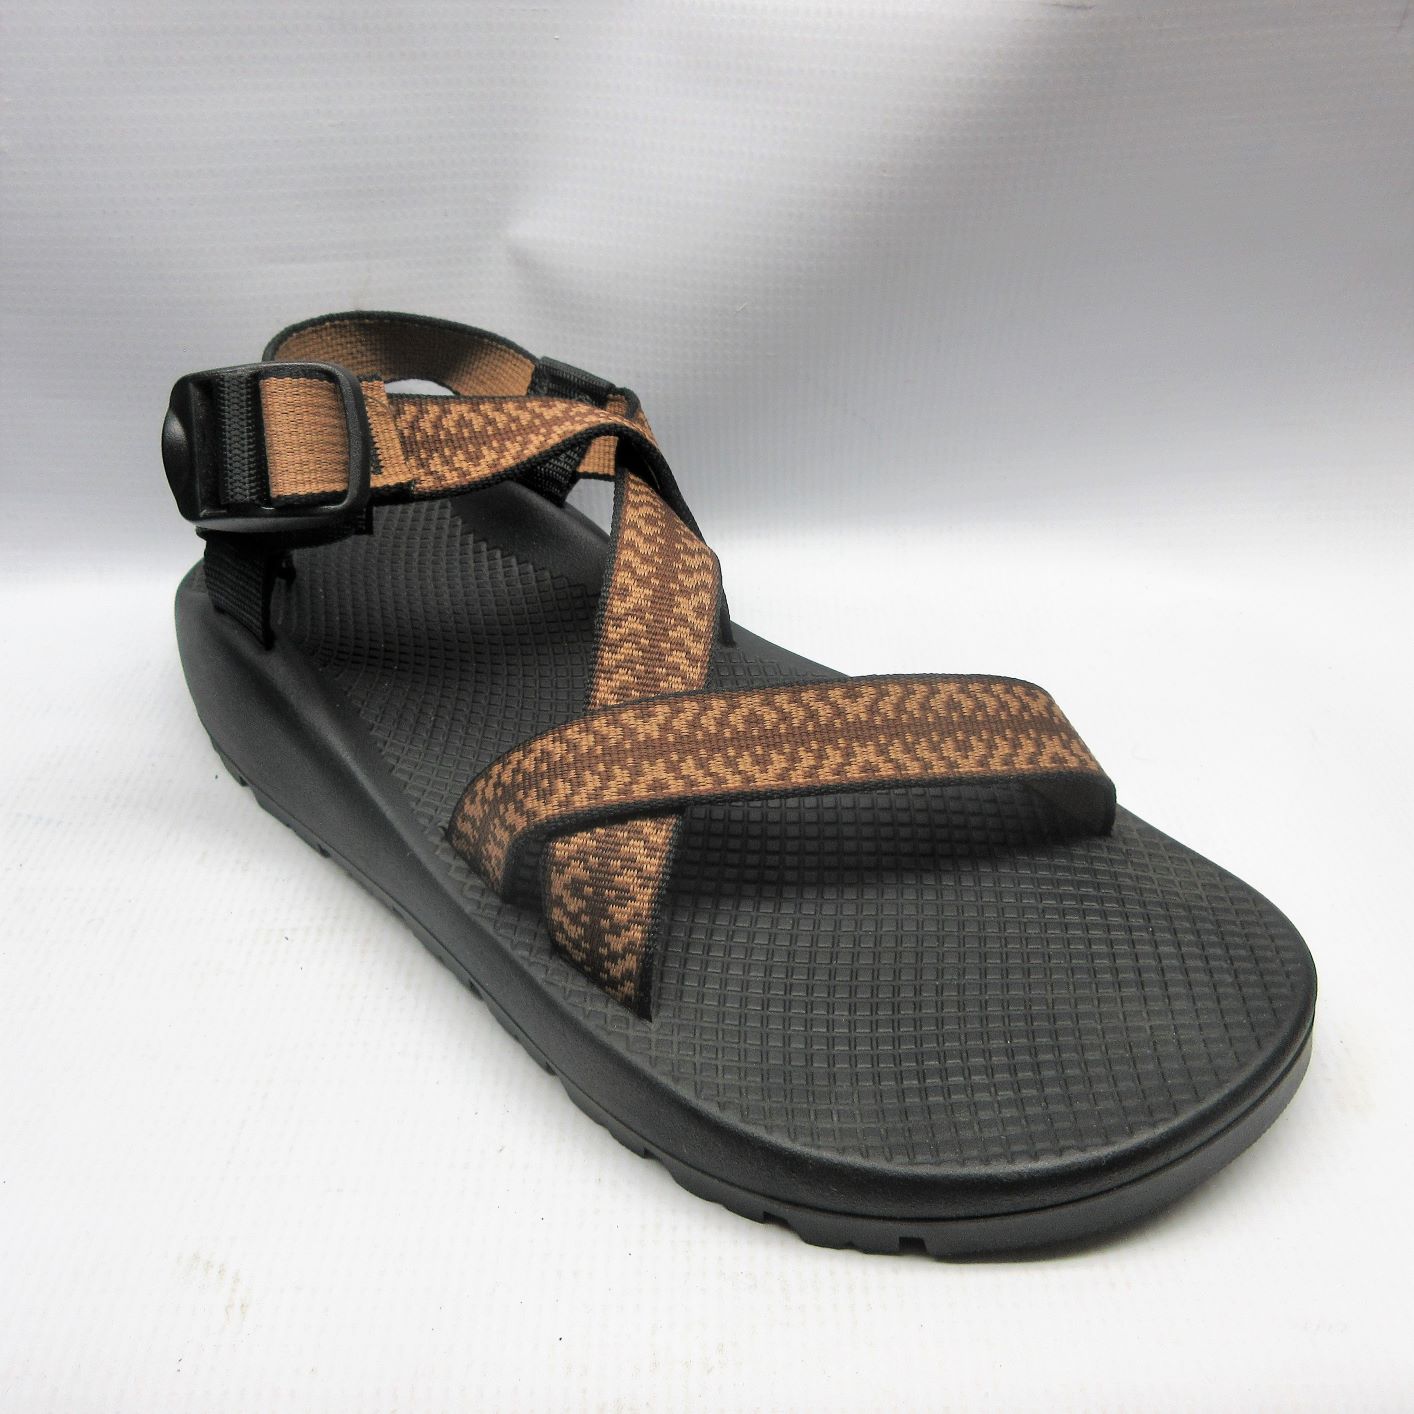 chaco sandals mens